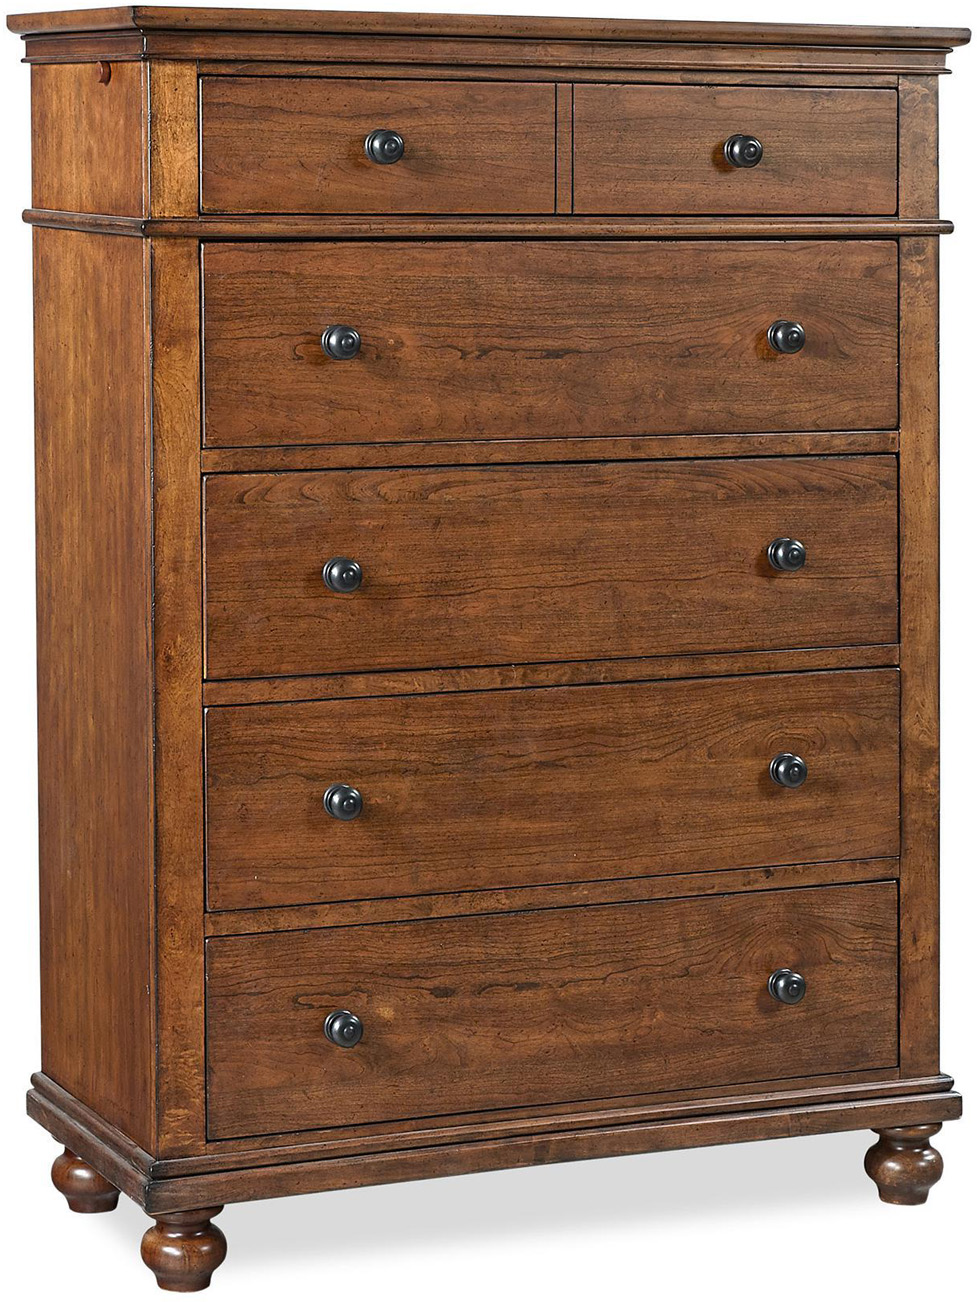 Aspenhome Provence I222-456 Casual 5-Drawer Chest with Felt-Lined